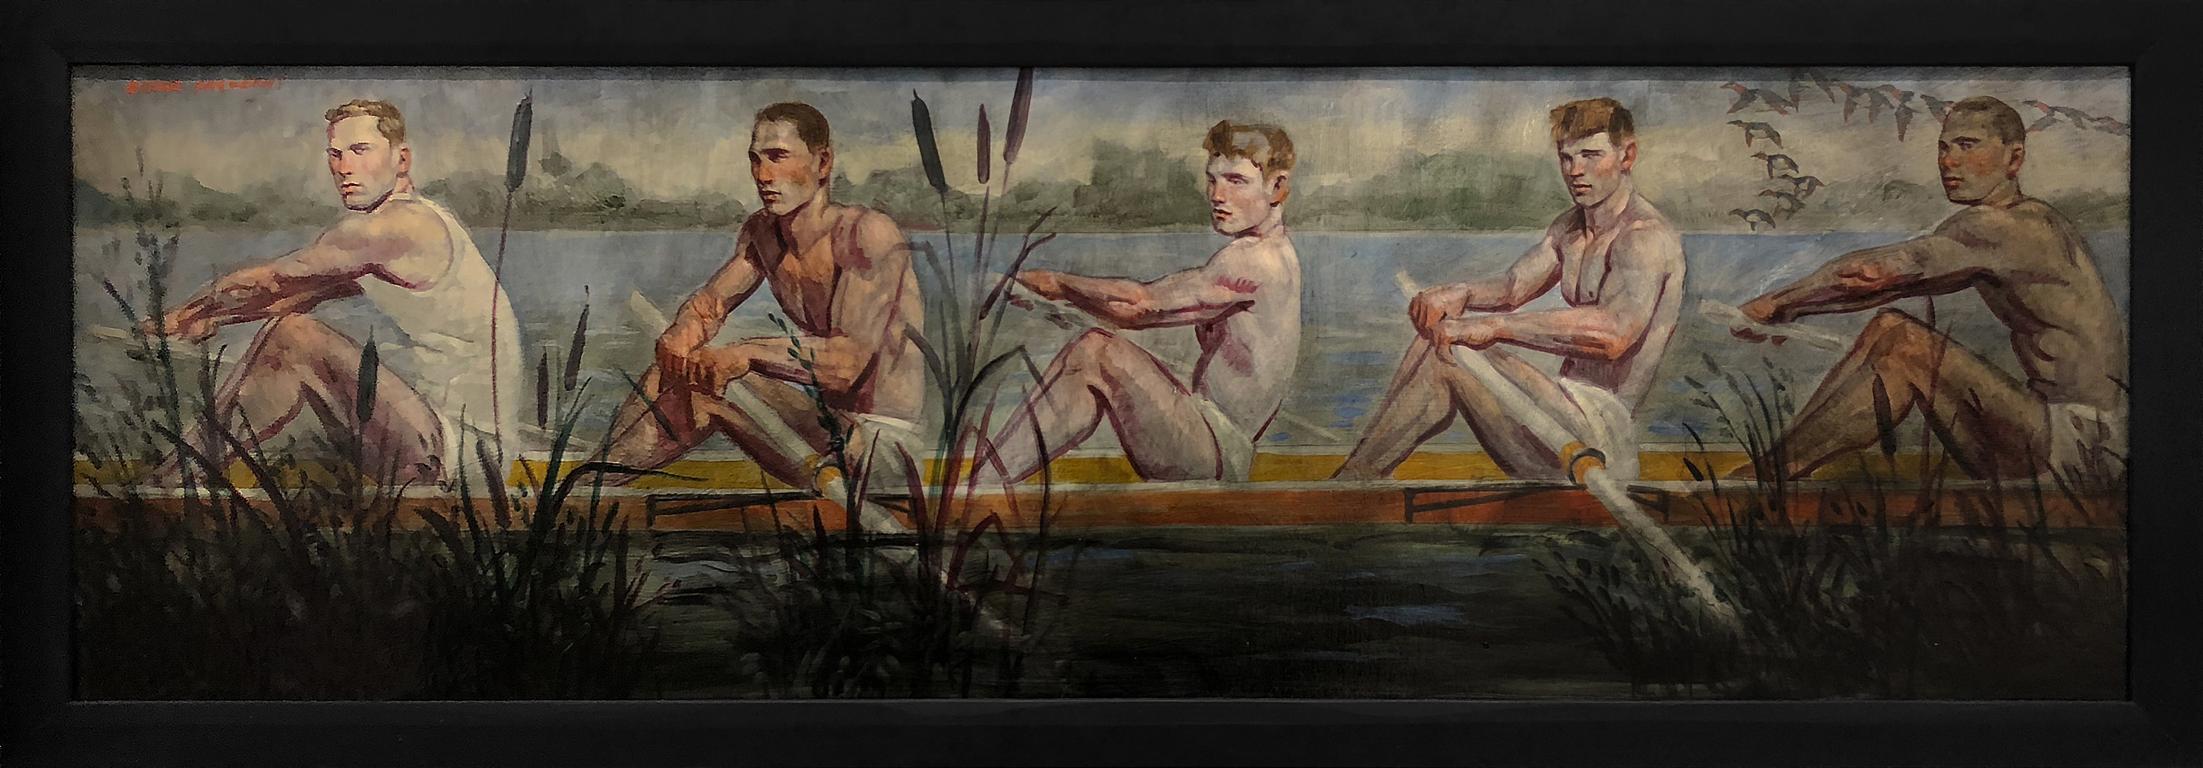 Mark Beard Portrait Painting - [Bruce Sargeant (1898-1938)] Five Rowers Gliding Through Cattails